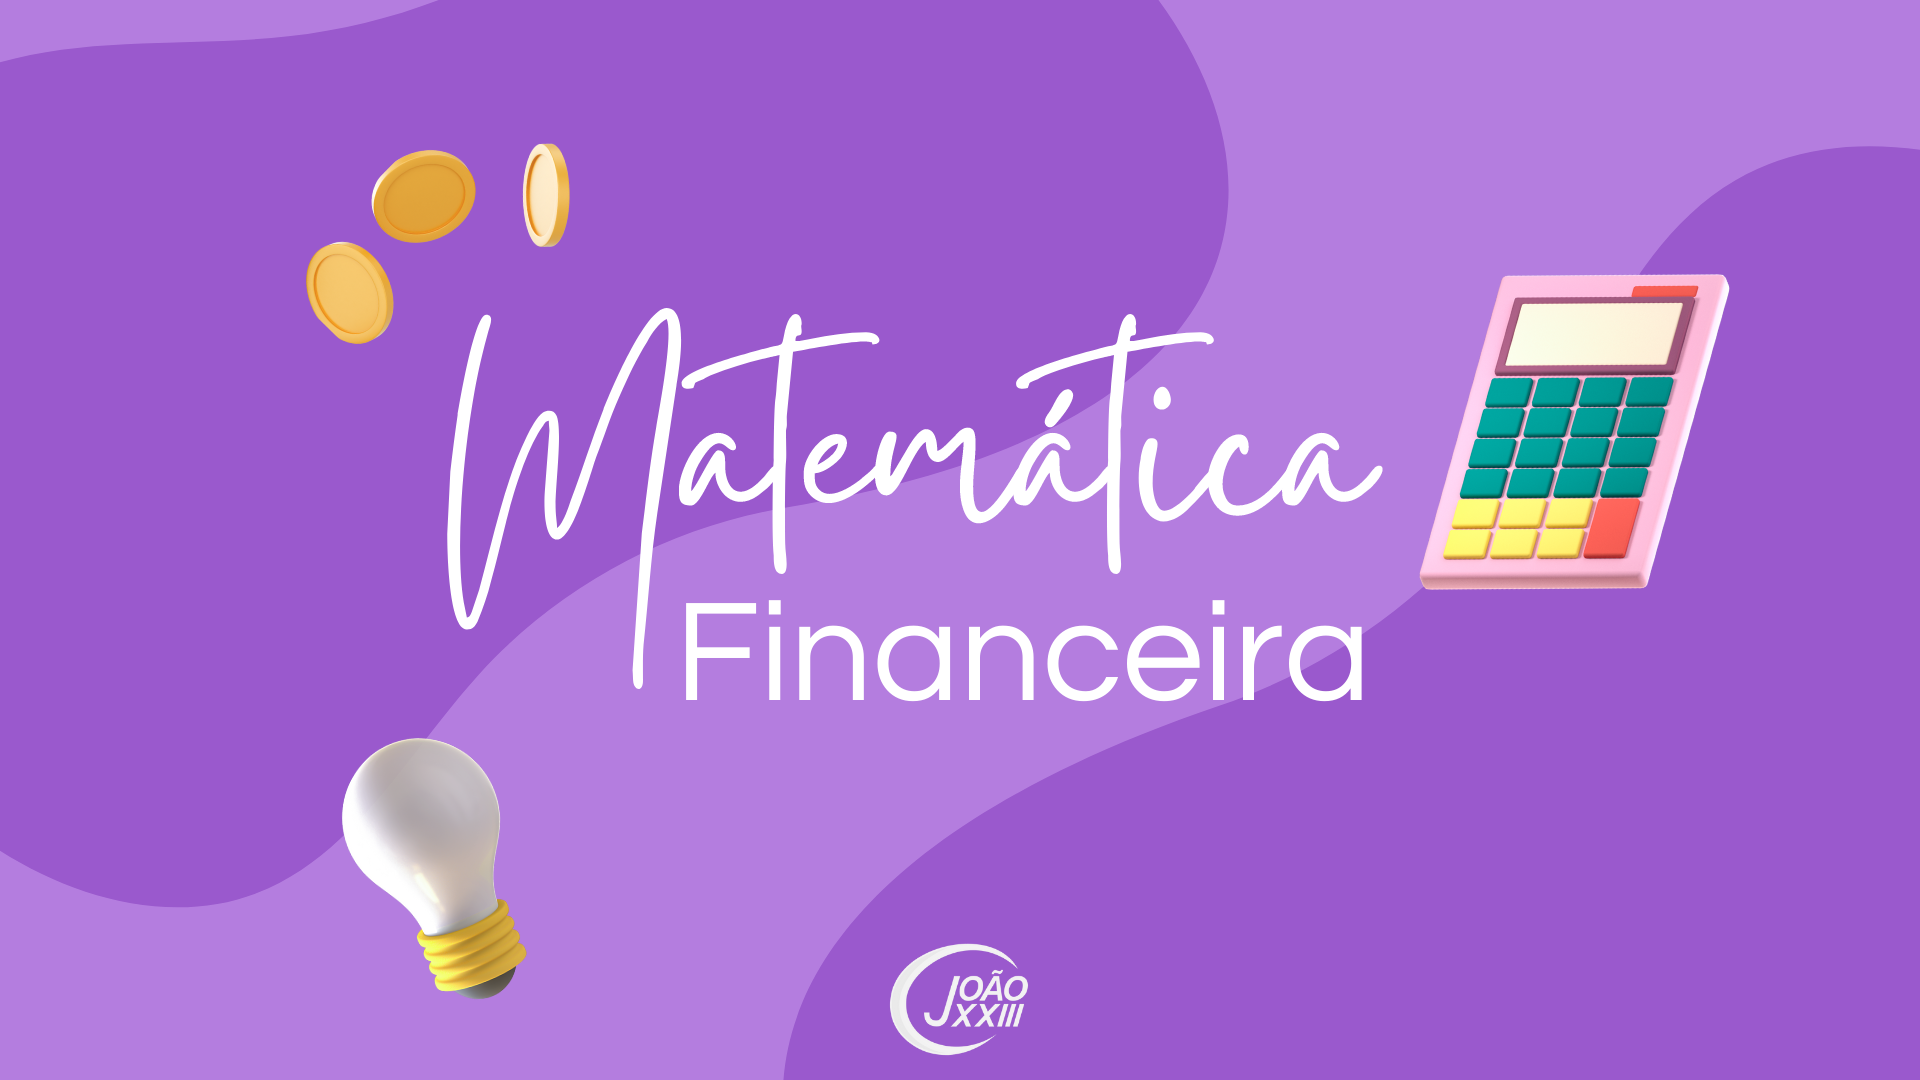 You are currently viewing Matemática Financeira